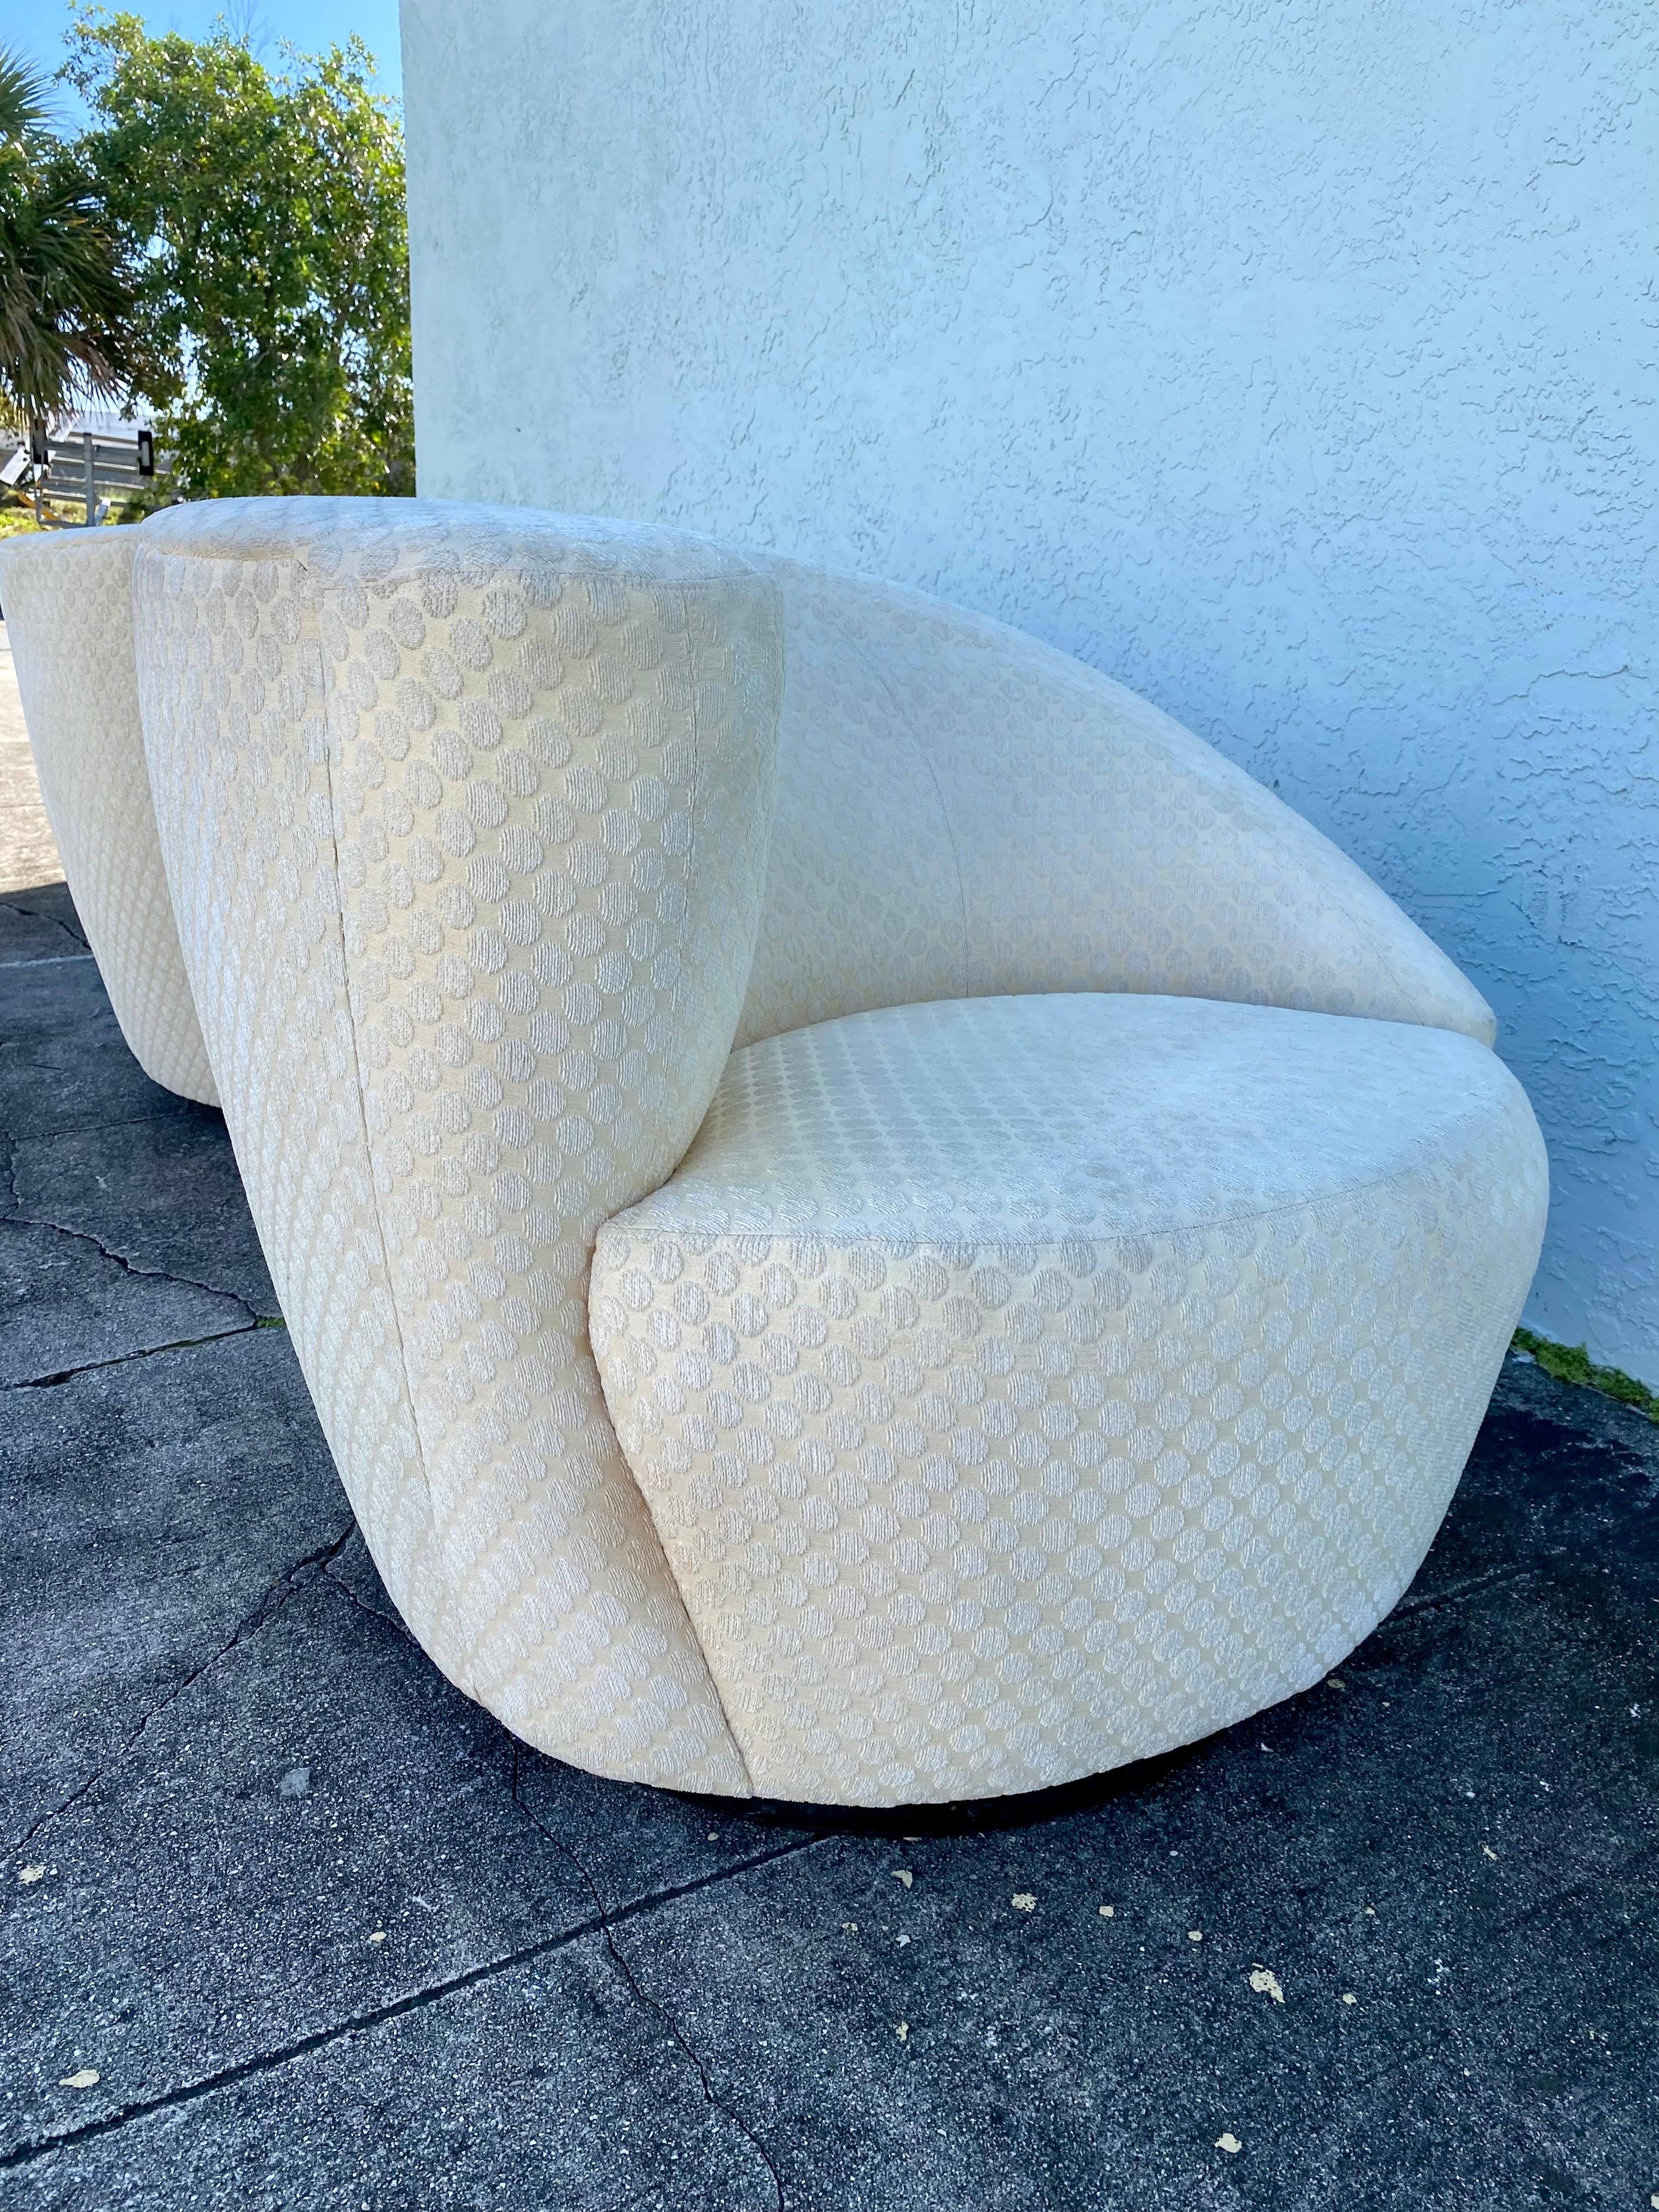 1980s Directional Cream Polka Dots Swivel Chairs, Set of 2 For Sale 1